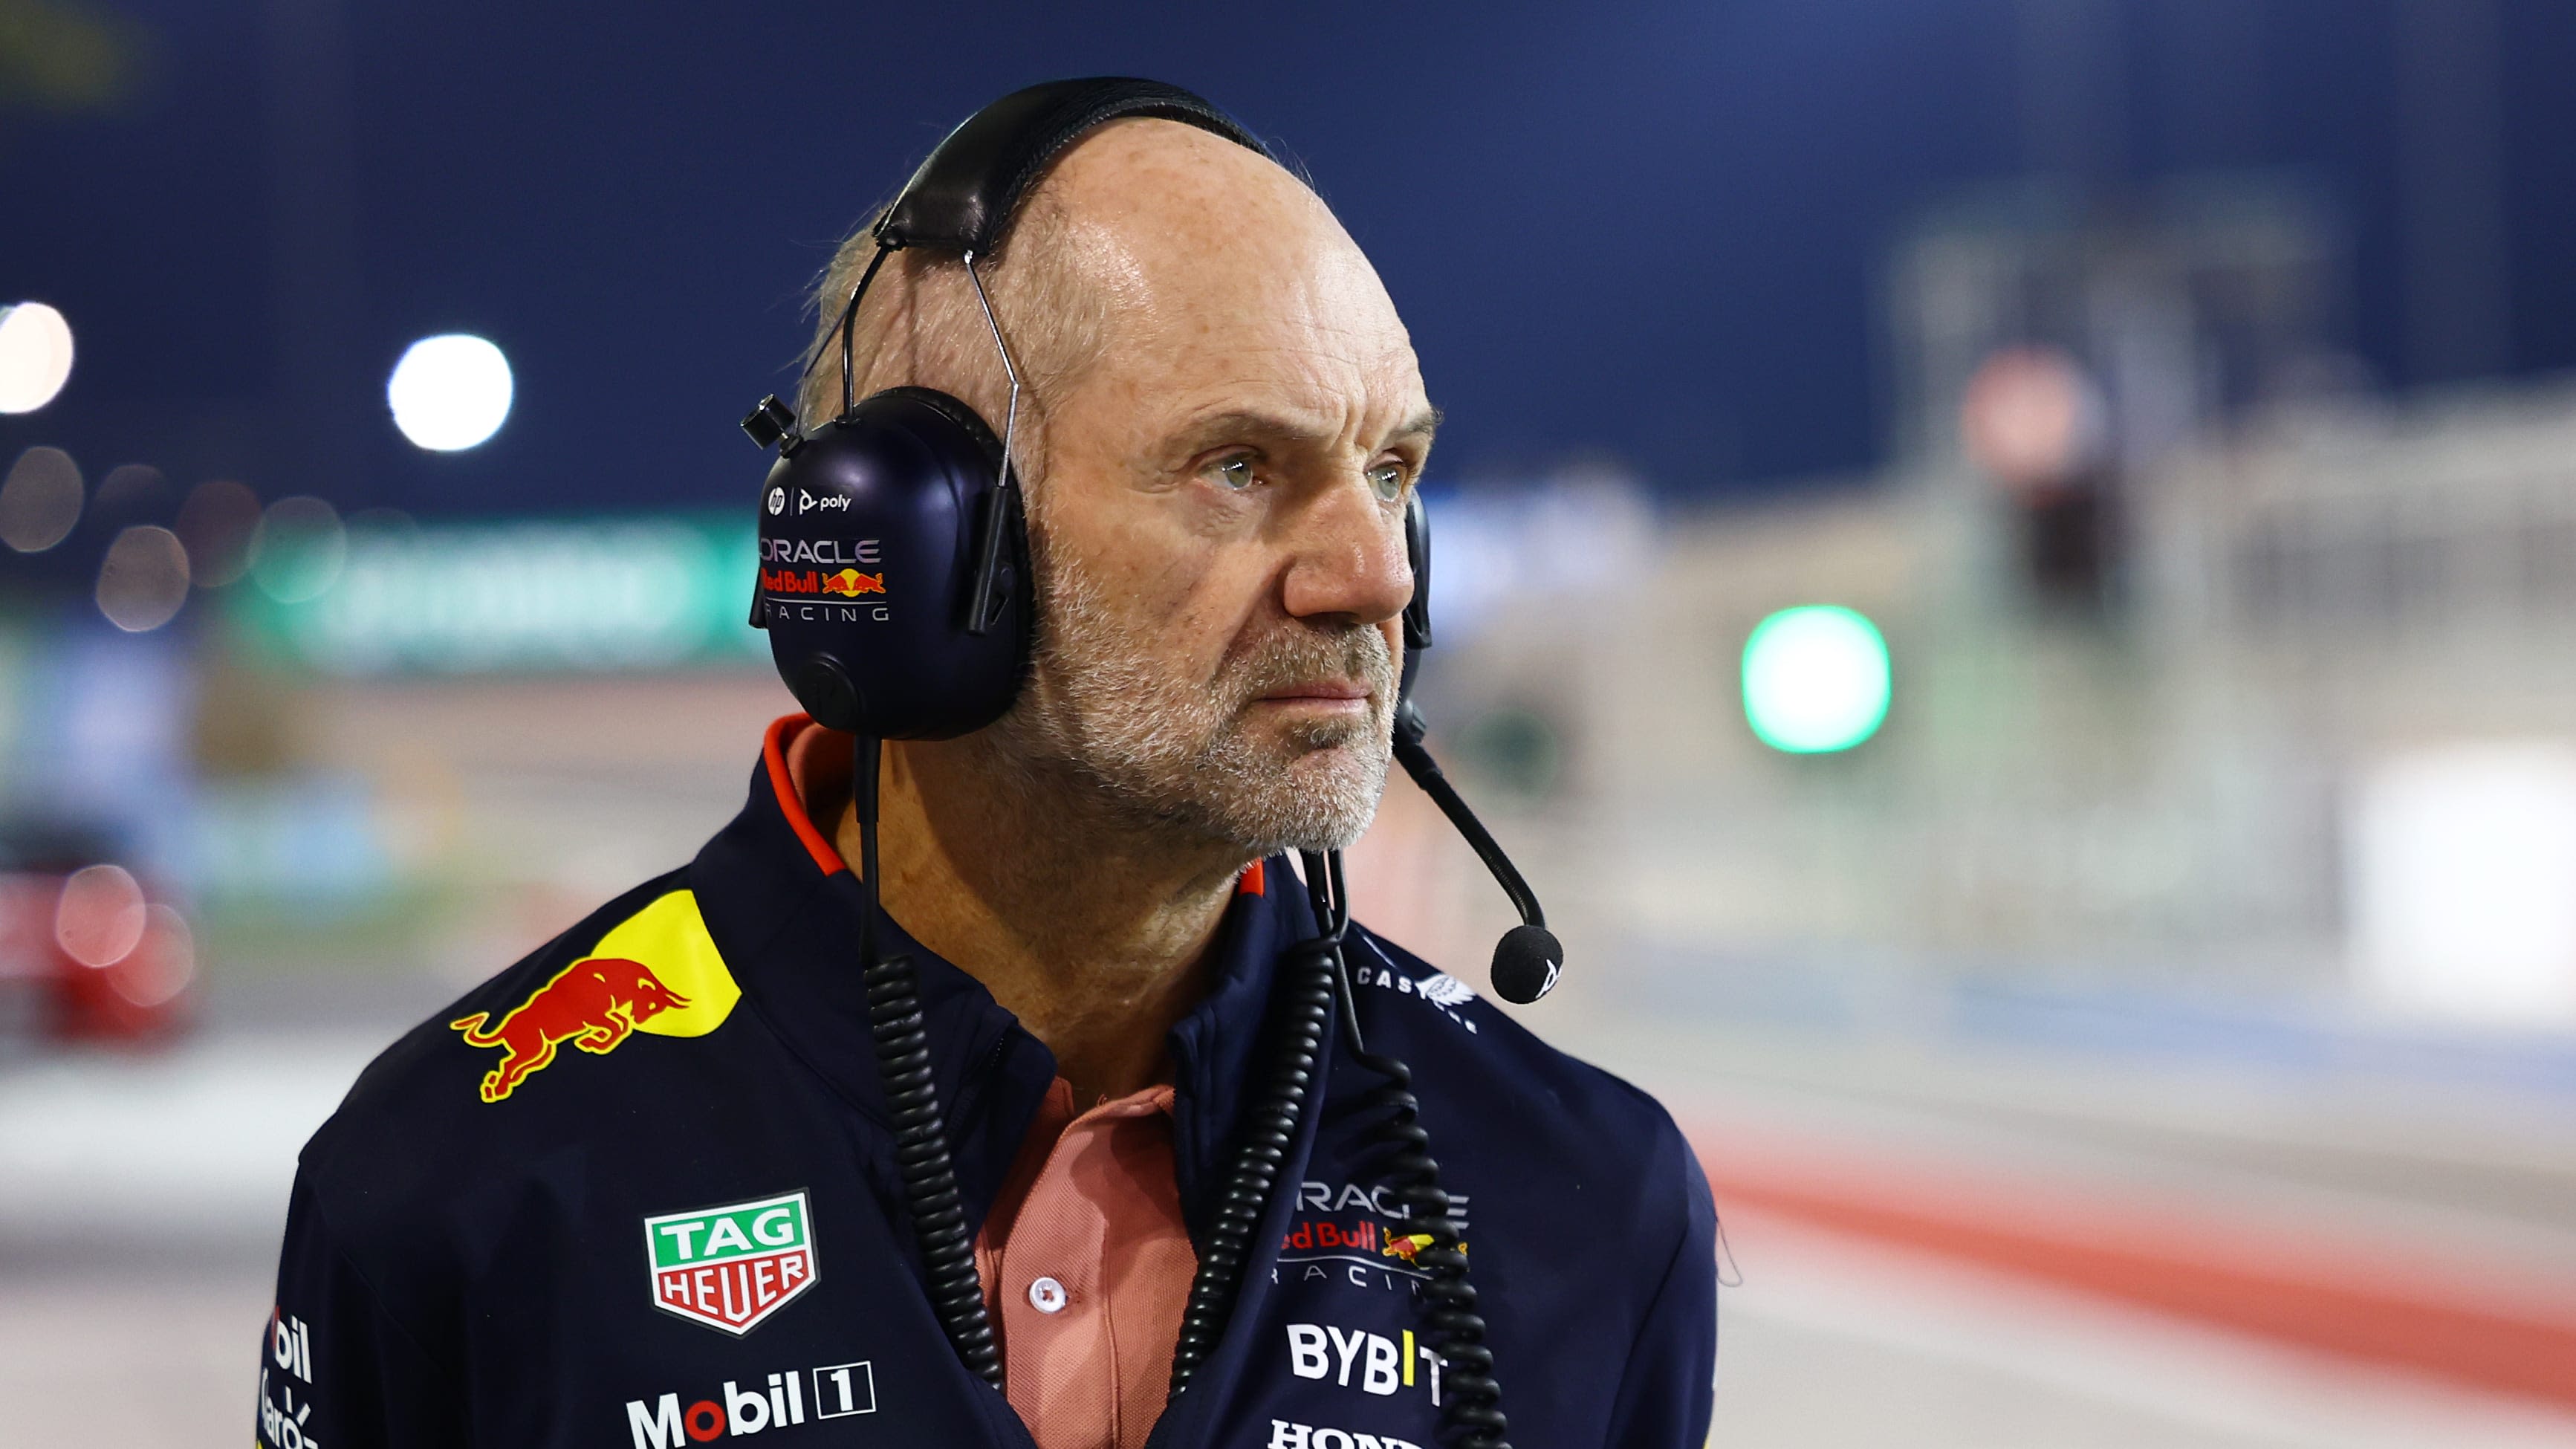 Red Bull F1 News: Adrian Newey Exit Talks Have Commenced According to Report